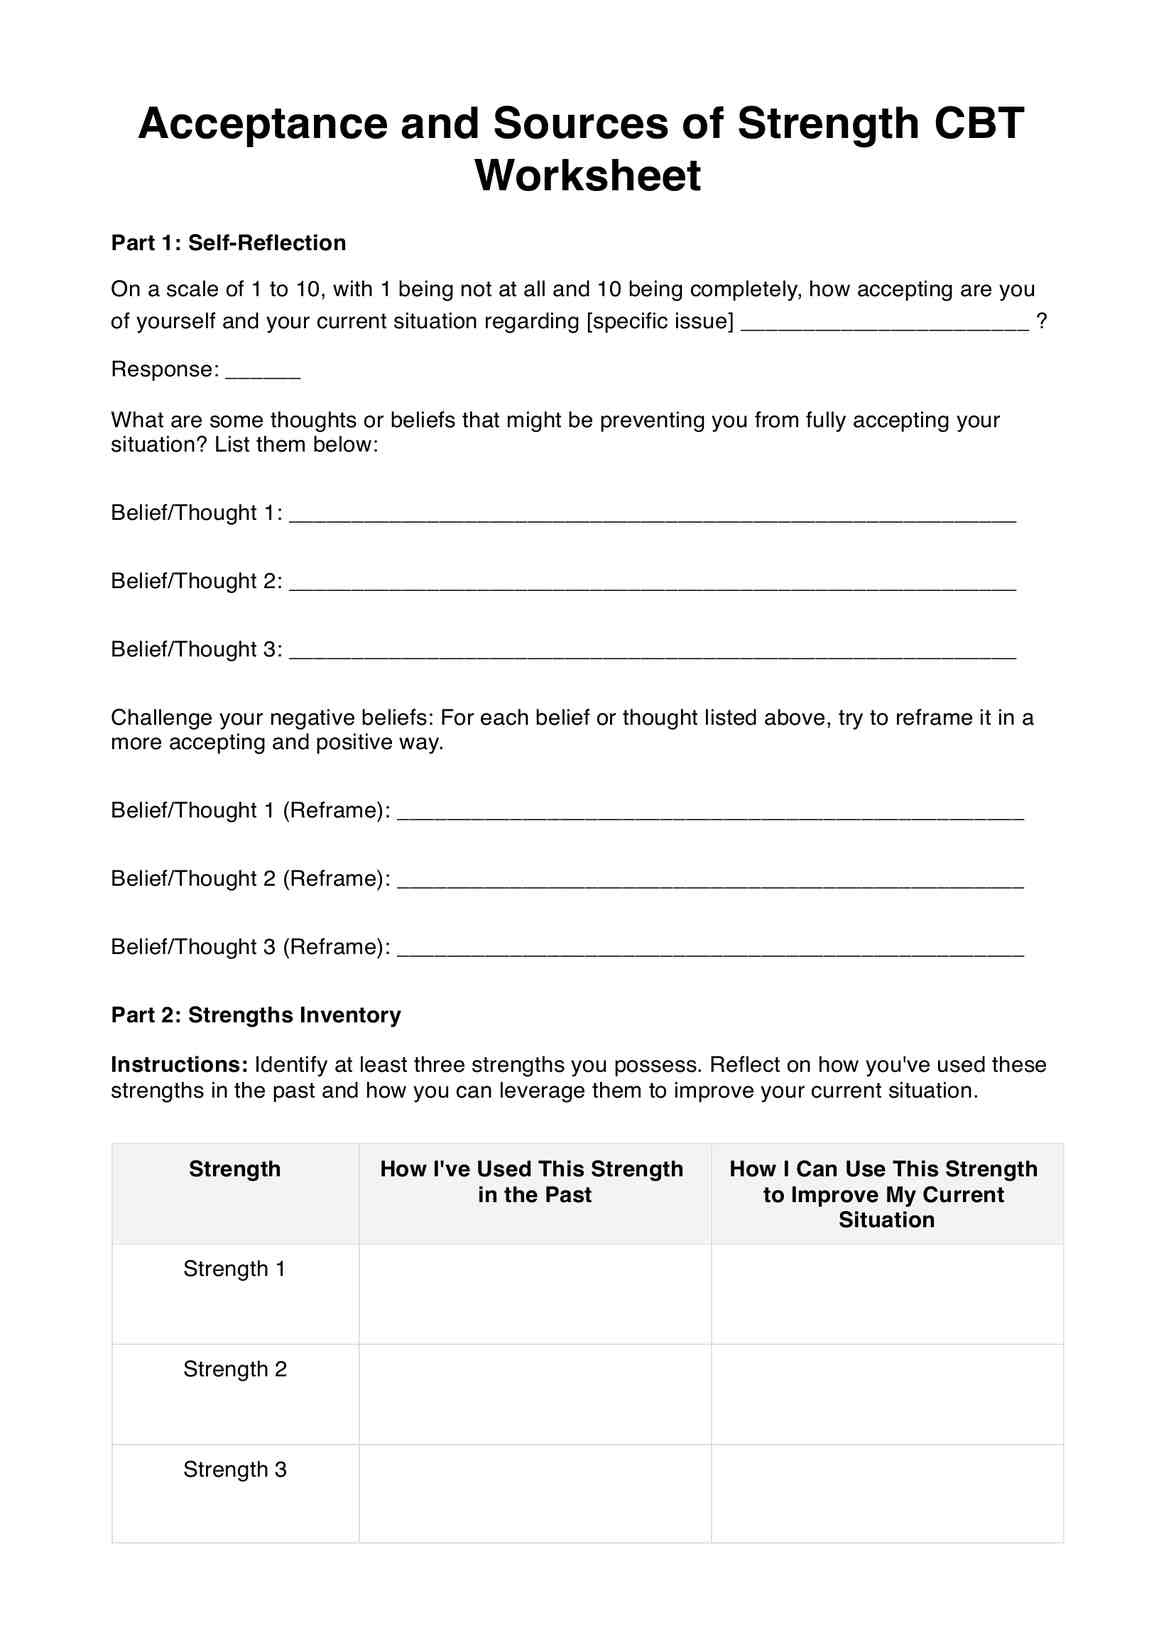 Acceptance and Sources of Strength CBT Worksheet PDF Example